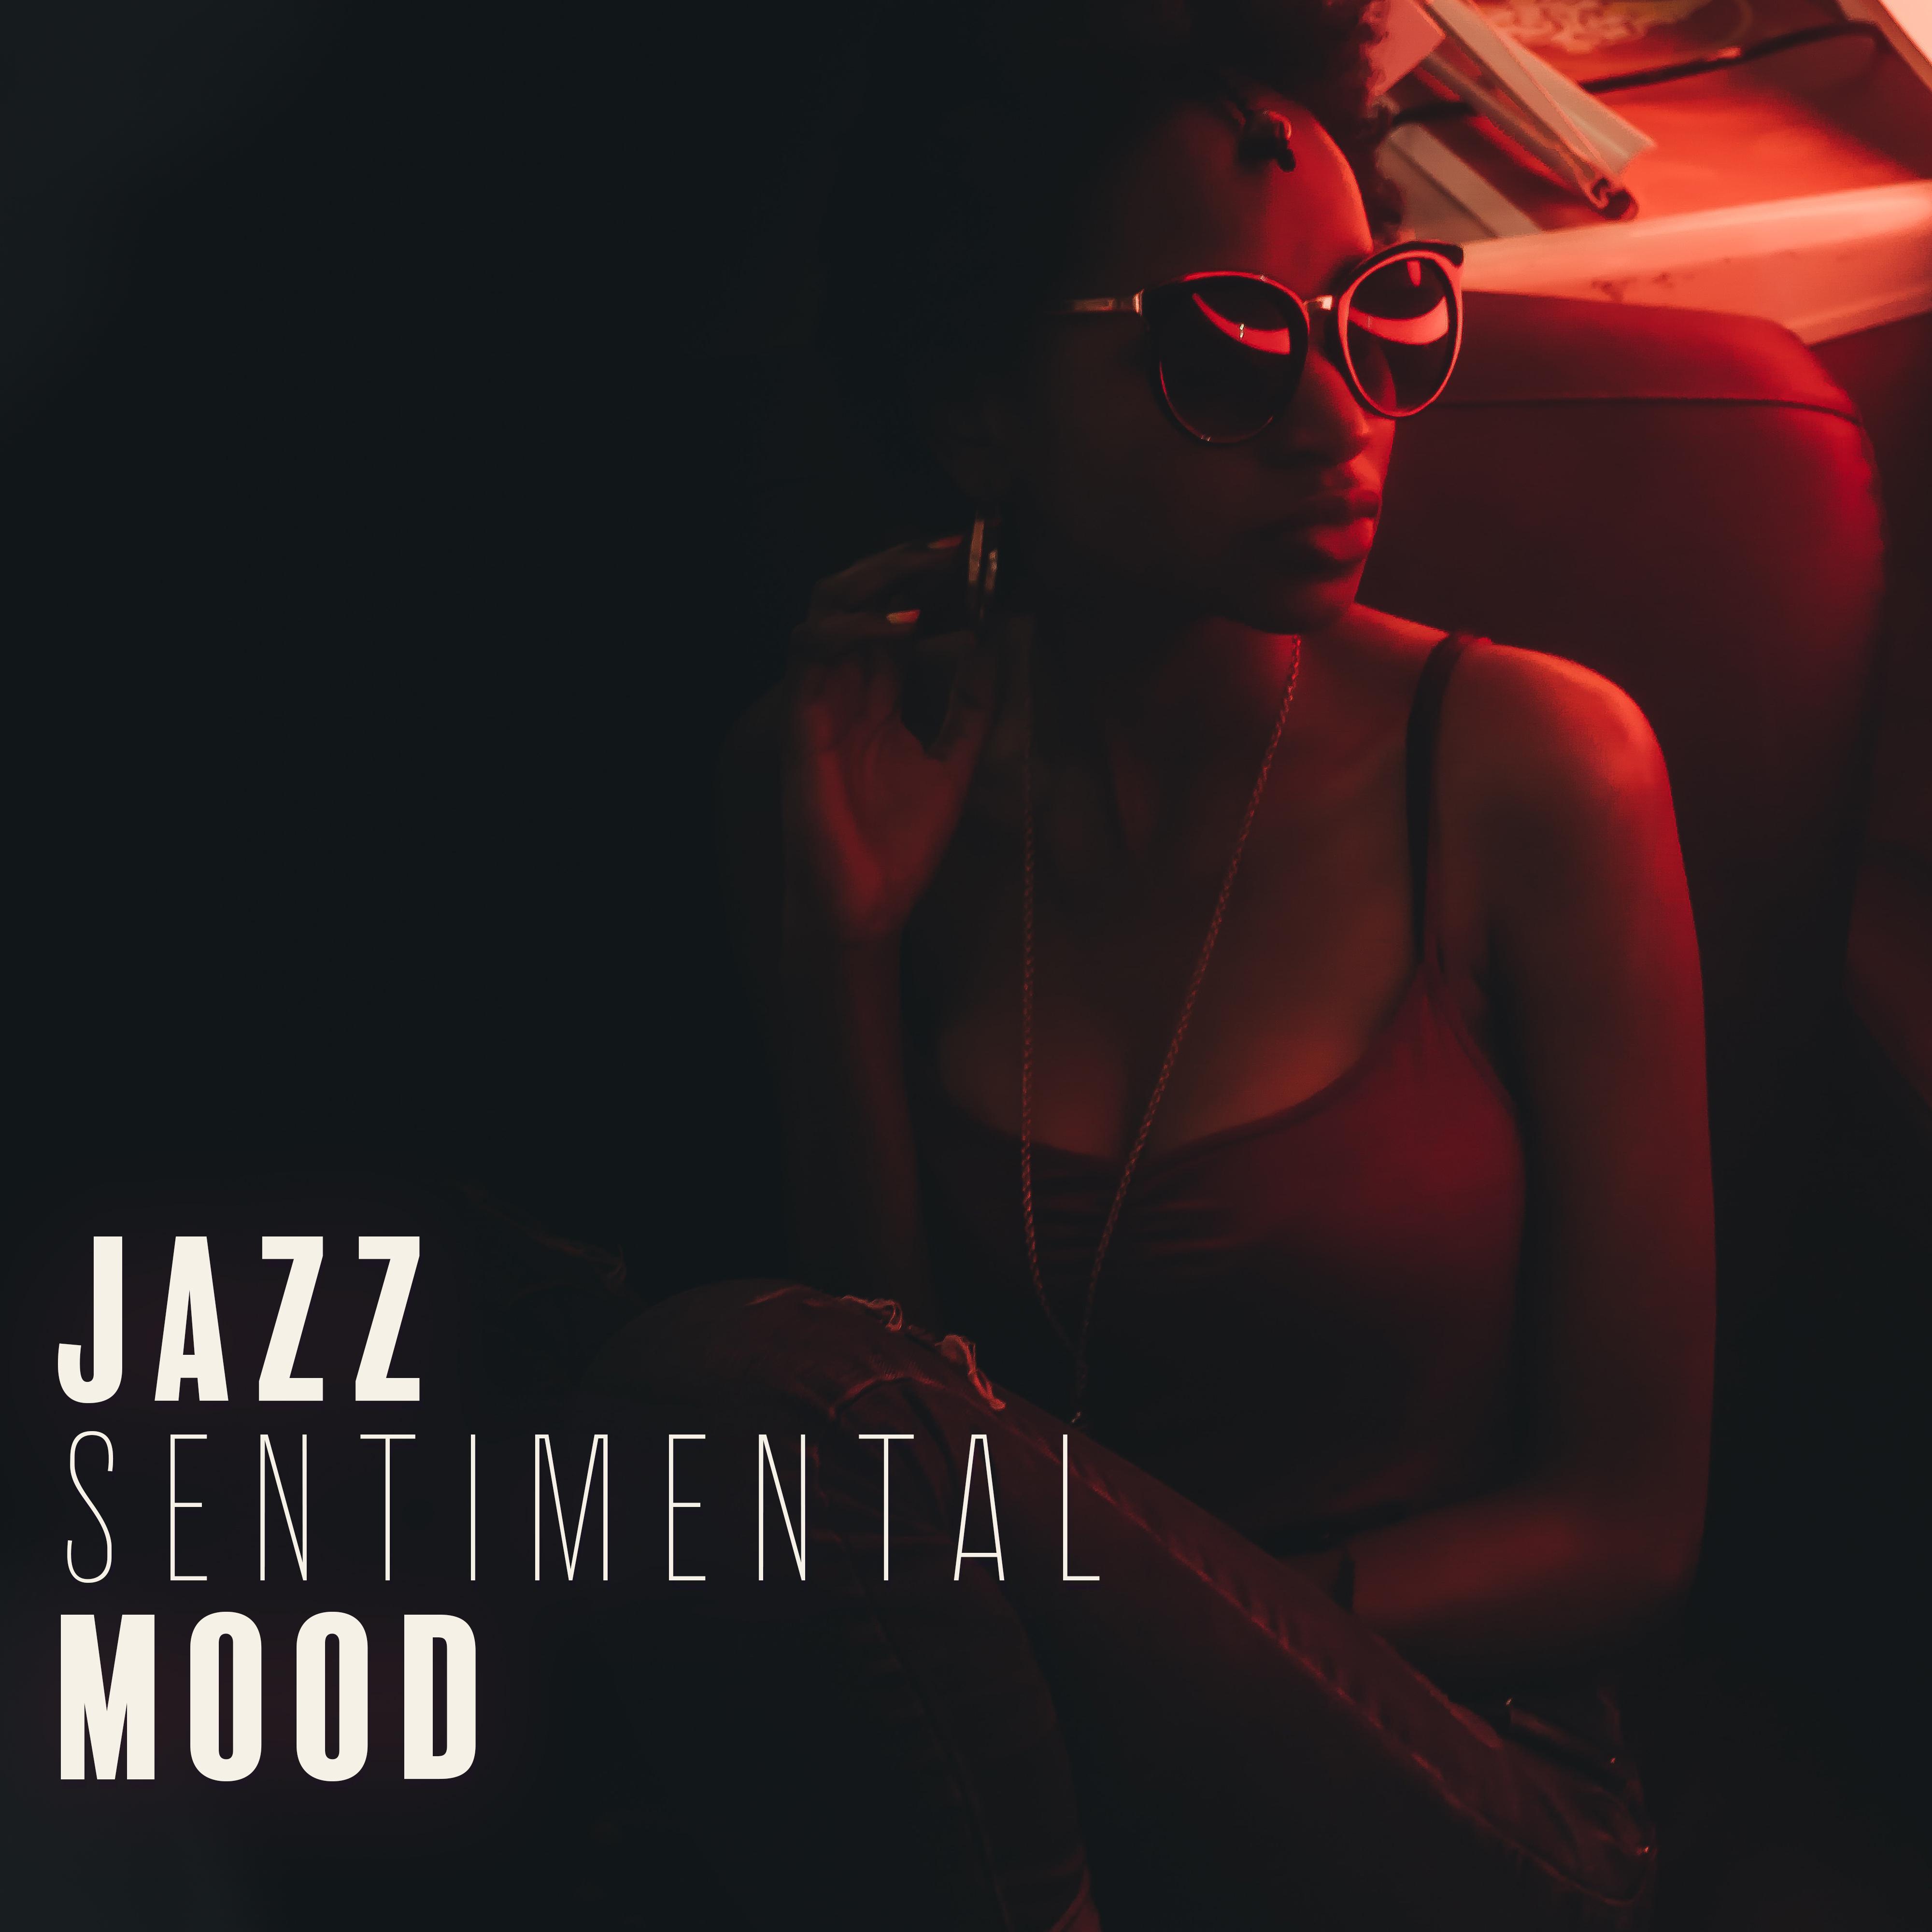 Jazz Sentimental Mood: Atmospheric Songs to Calm Down and Relax, to Achieve Inner Balance and Peace, as Well as the Feeling of Deep Relaxation and Serenity